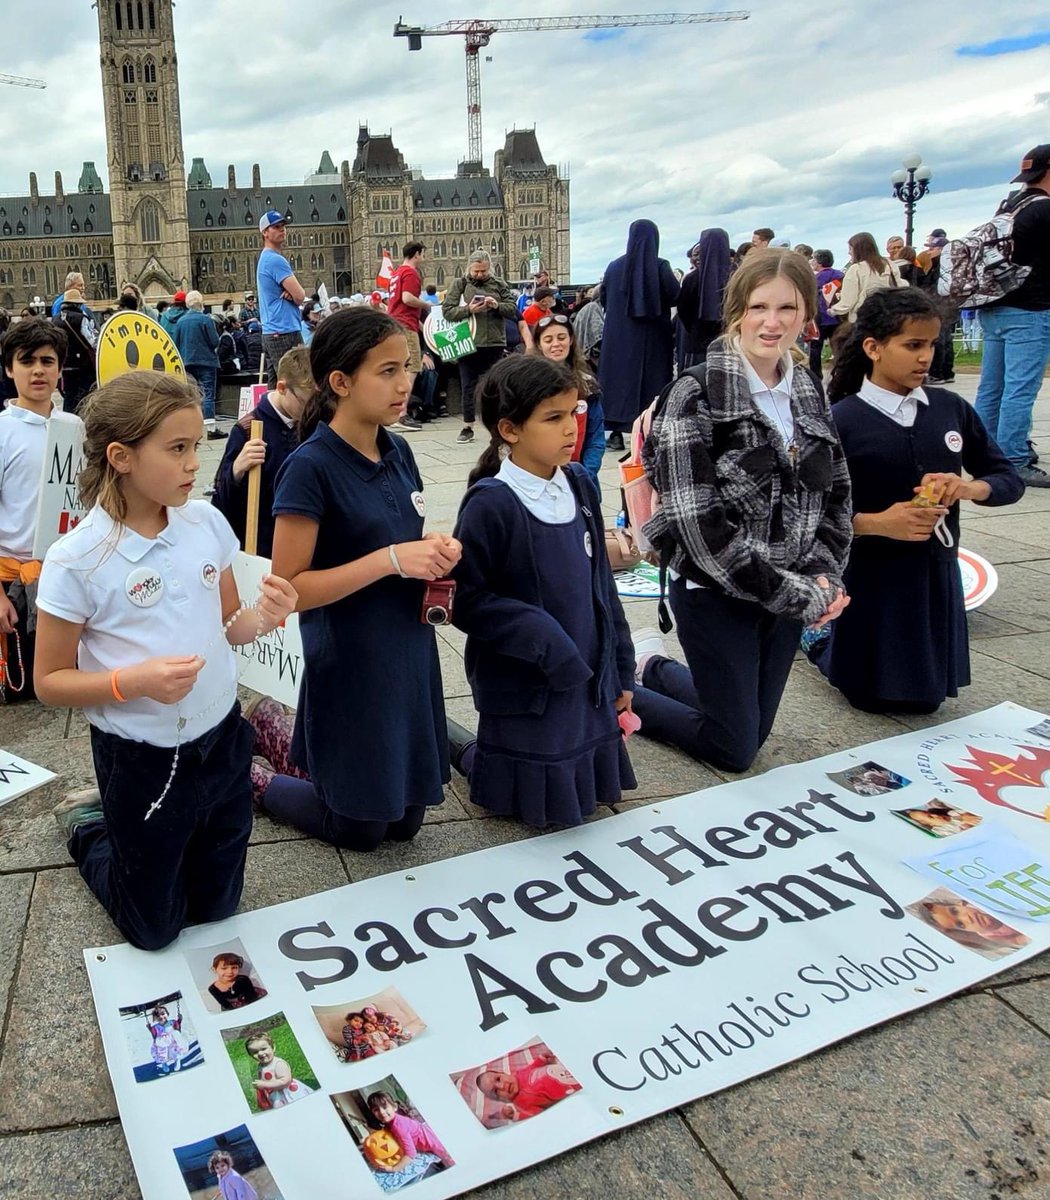 Catholic students of a Classical Catholic school pray on their knees at the March for Life rally in Ottawa, Canada. 

Image: Sacred Heart Academy